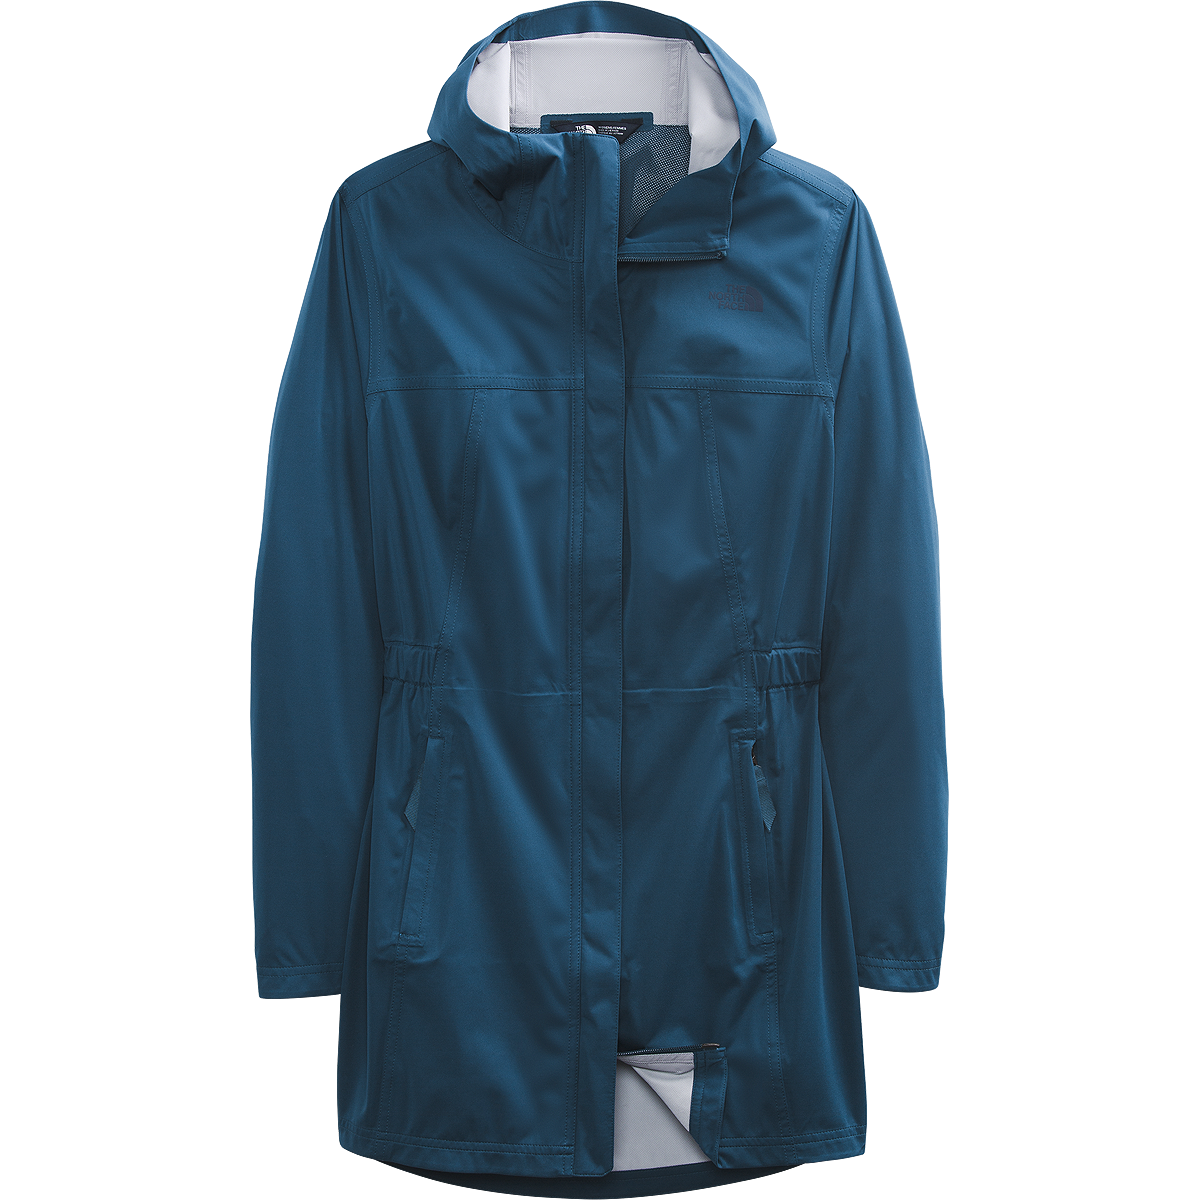 Women's Allproof Stretch Parka alternate view